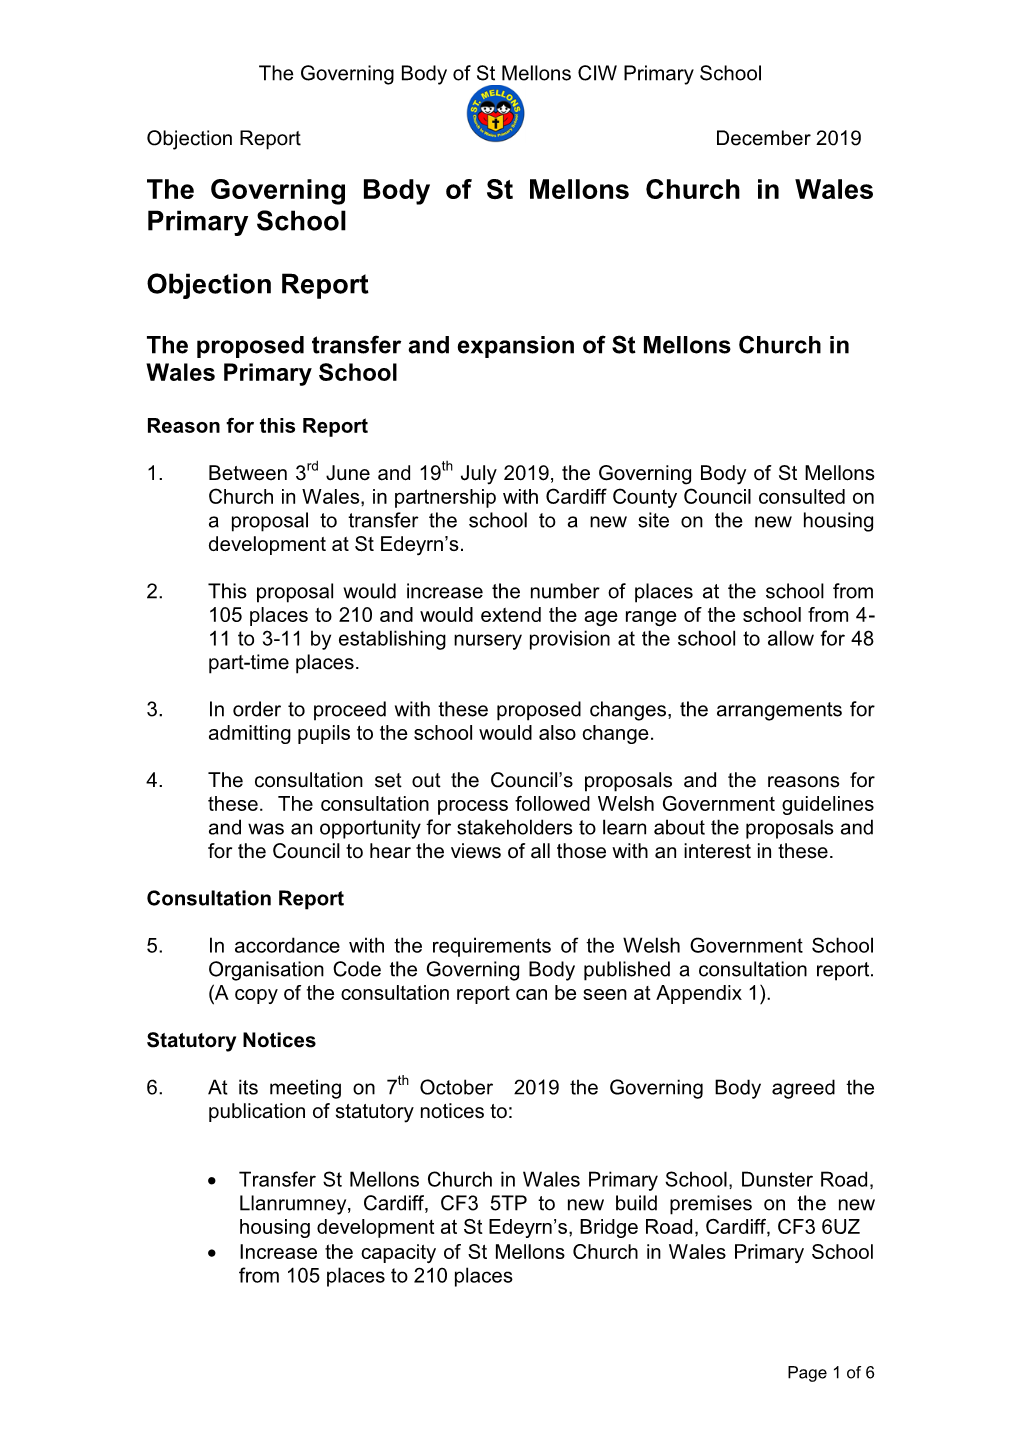 The Governing Body of St Mellons Church in Wales Primary School